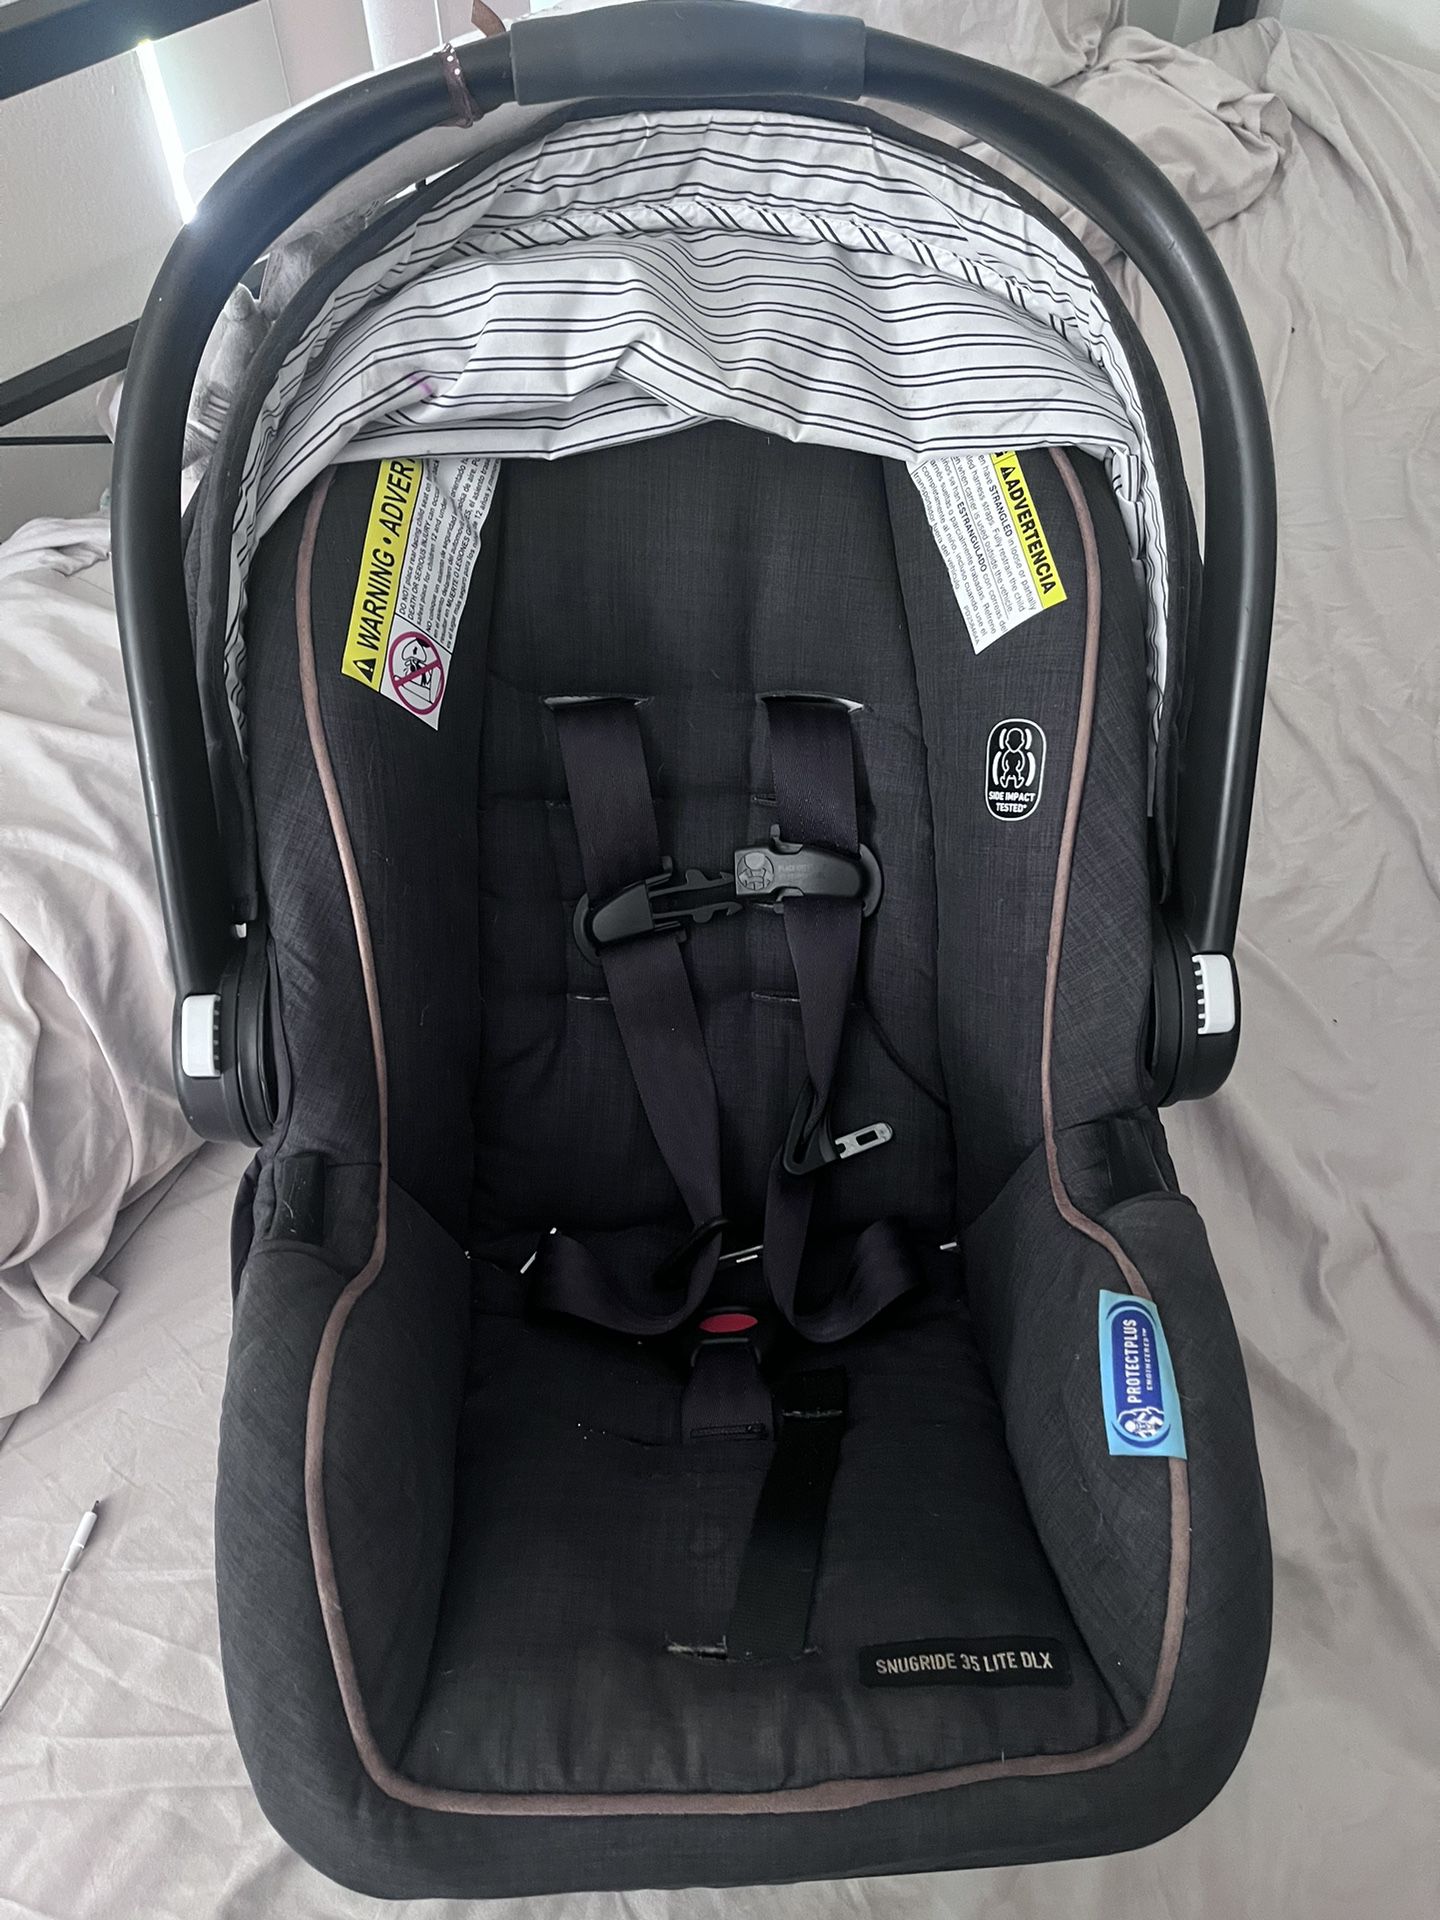 Graco Infant carseat 